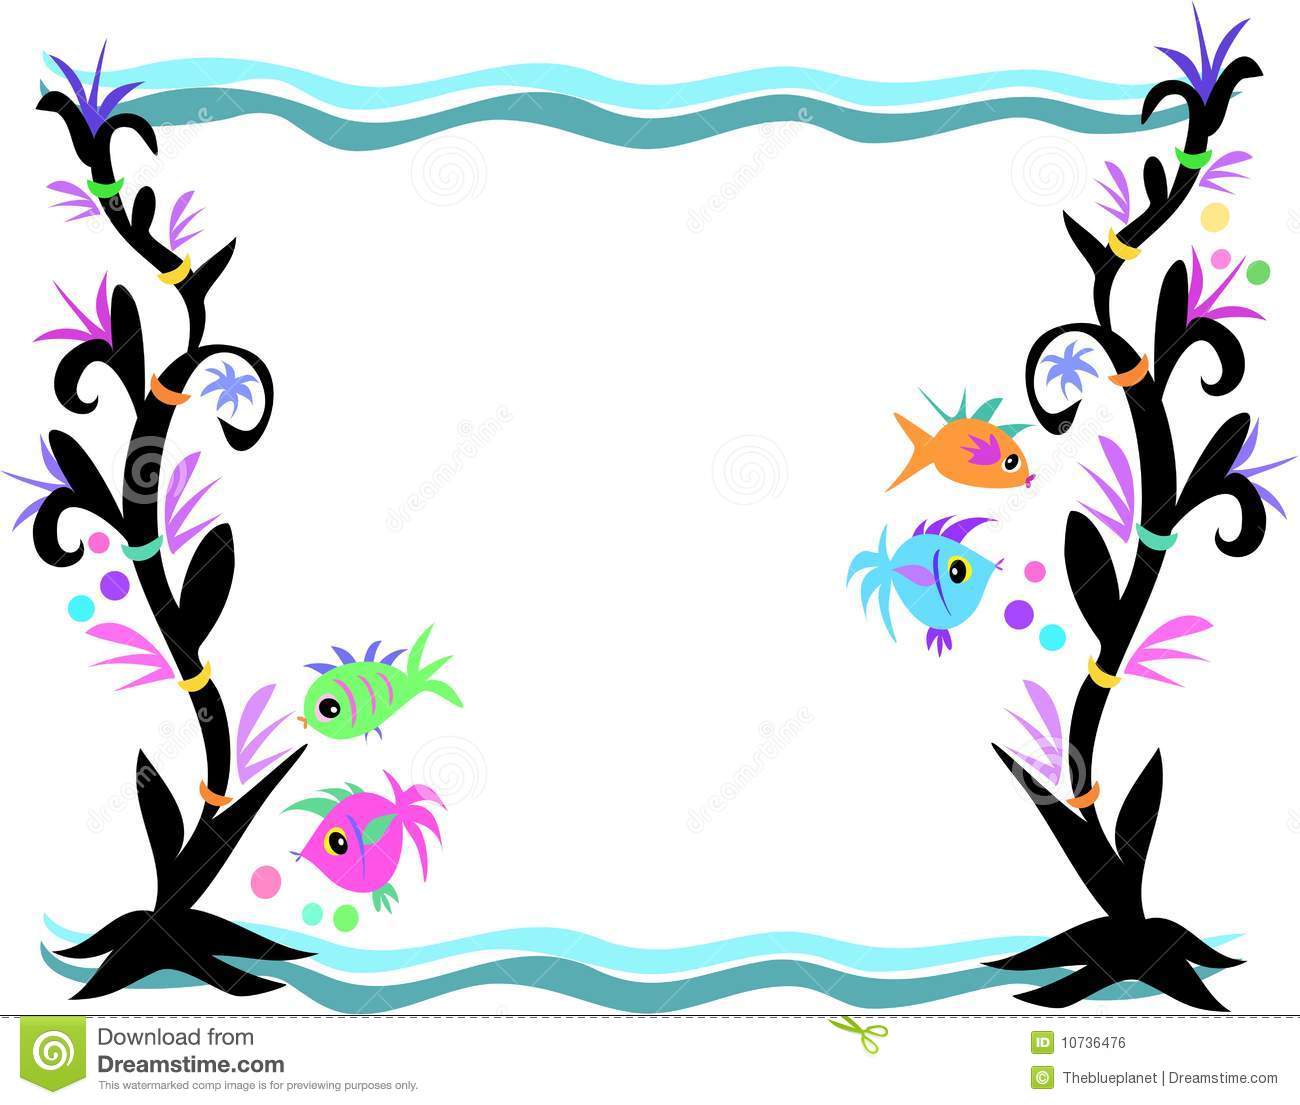 Water Waves Border Clipart   Clipart Panda   Free Clipart Images